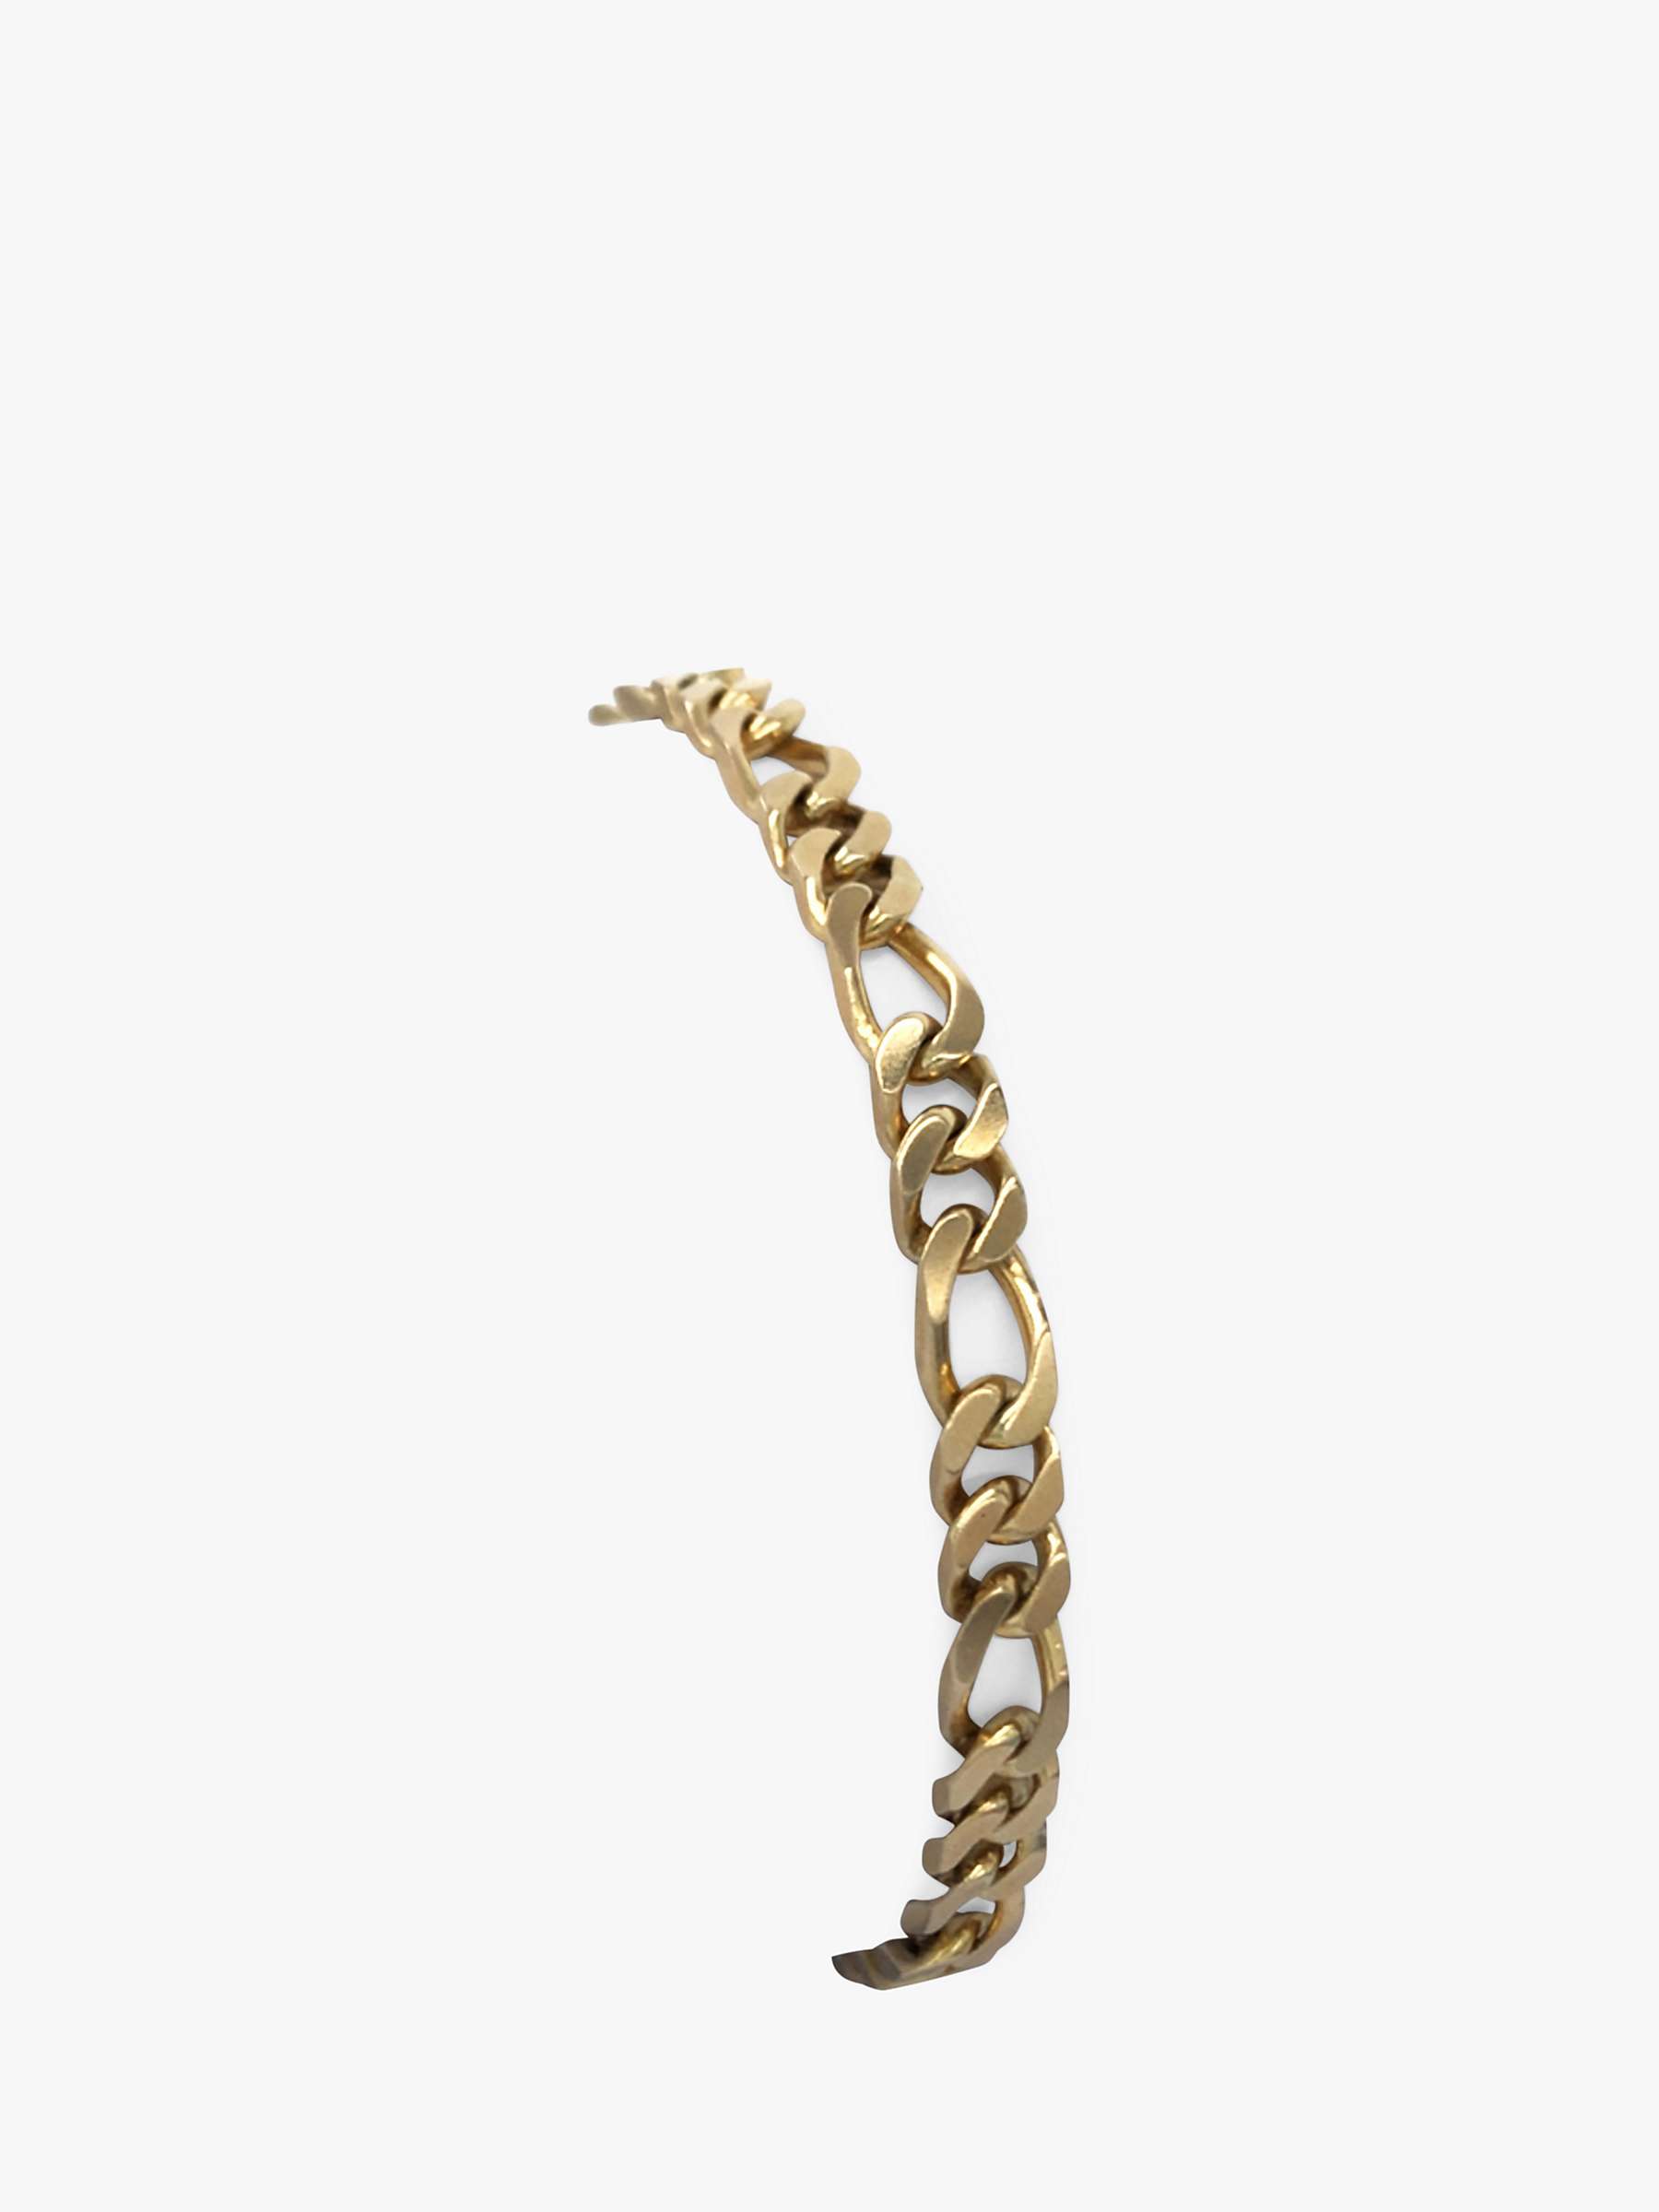 Buy Vintage Fine Jewellery Second Hand 9ct Yellow Gold Curb & Figaro Chain Link Bracelet, Dated London 1986 Online at johnlewis.com